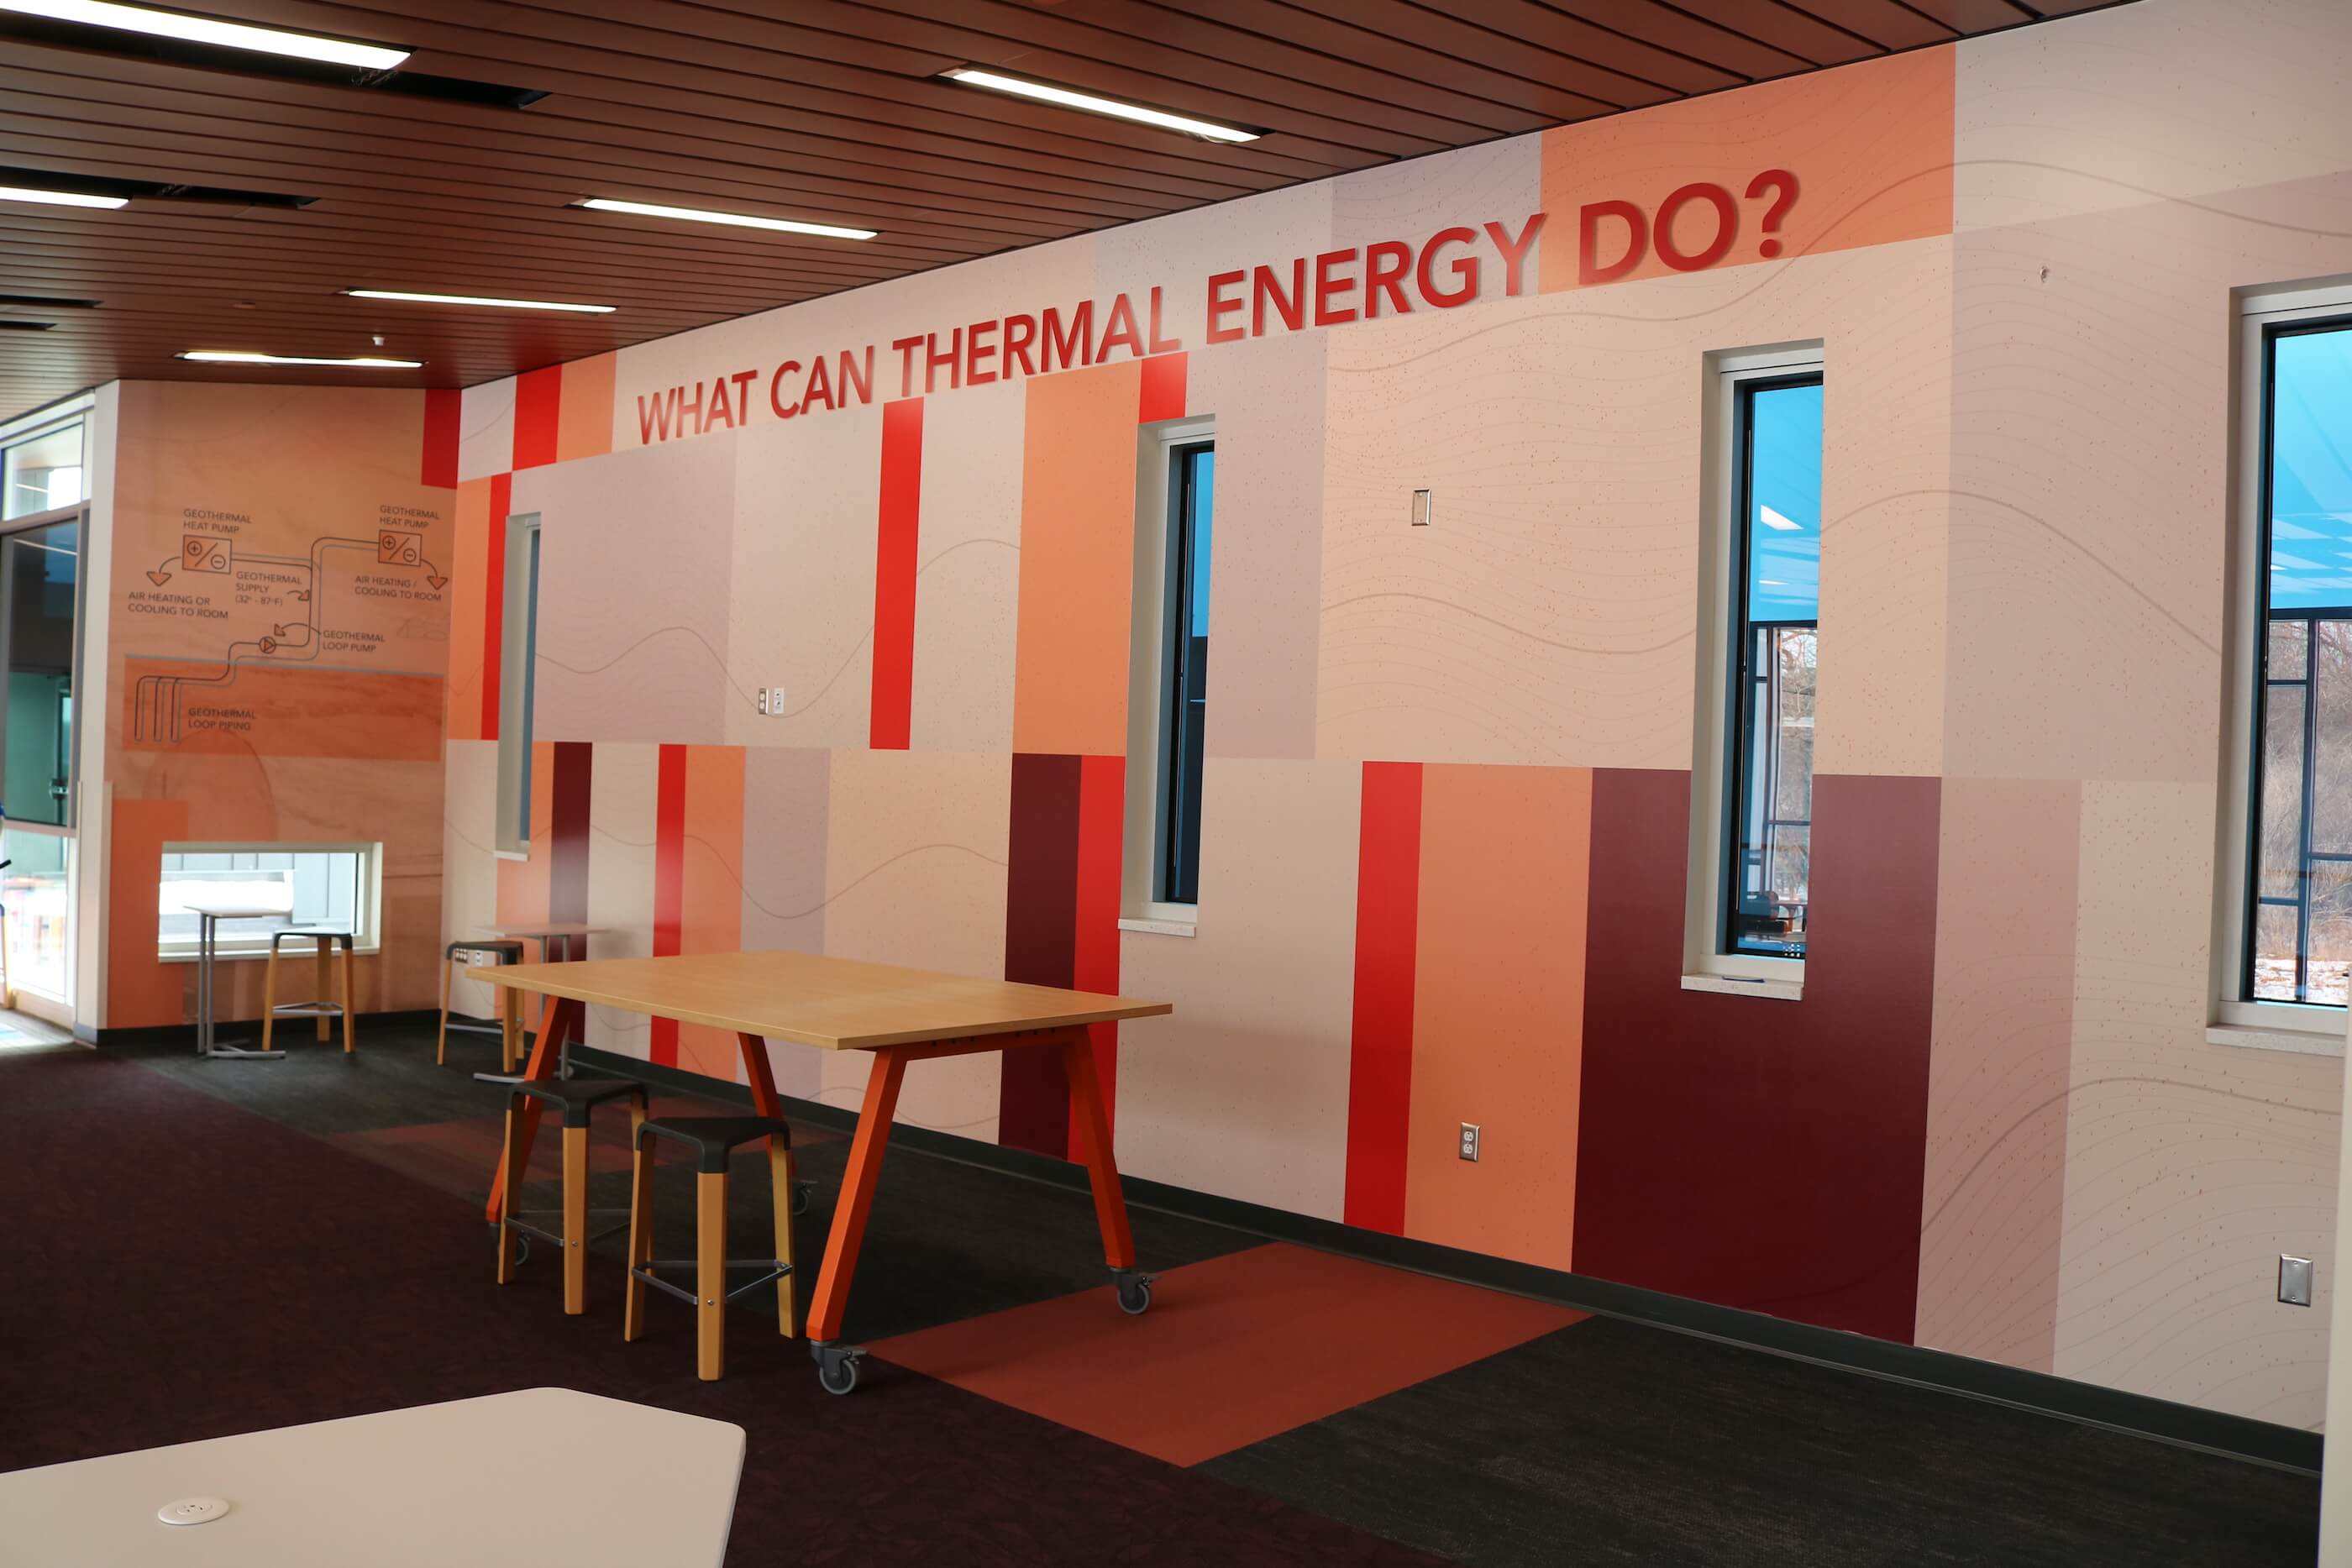 educational environmental graphics in a school setting